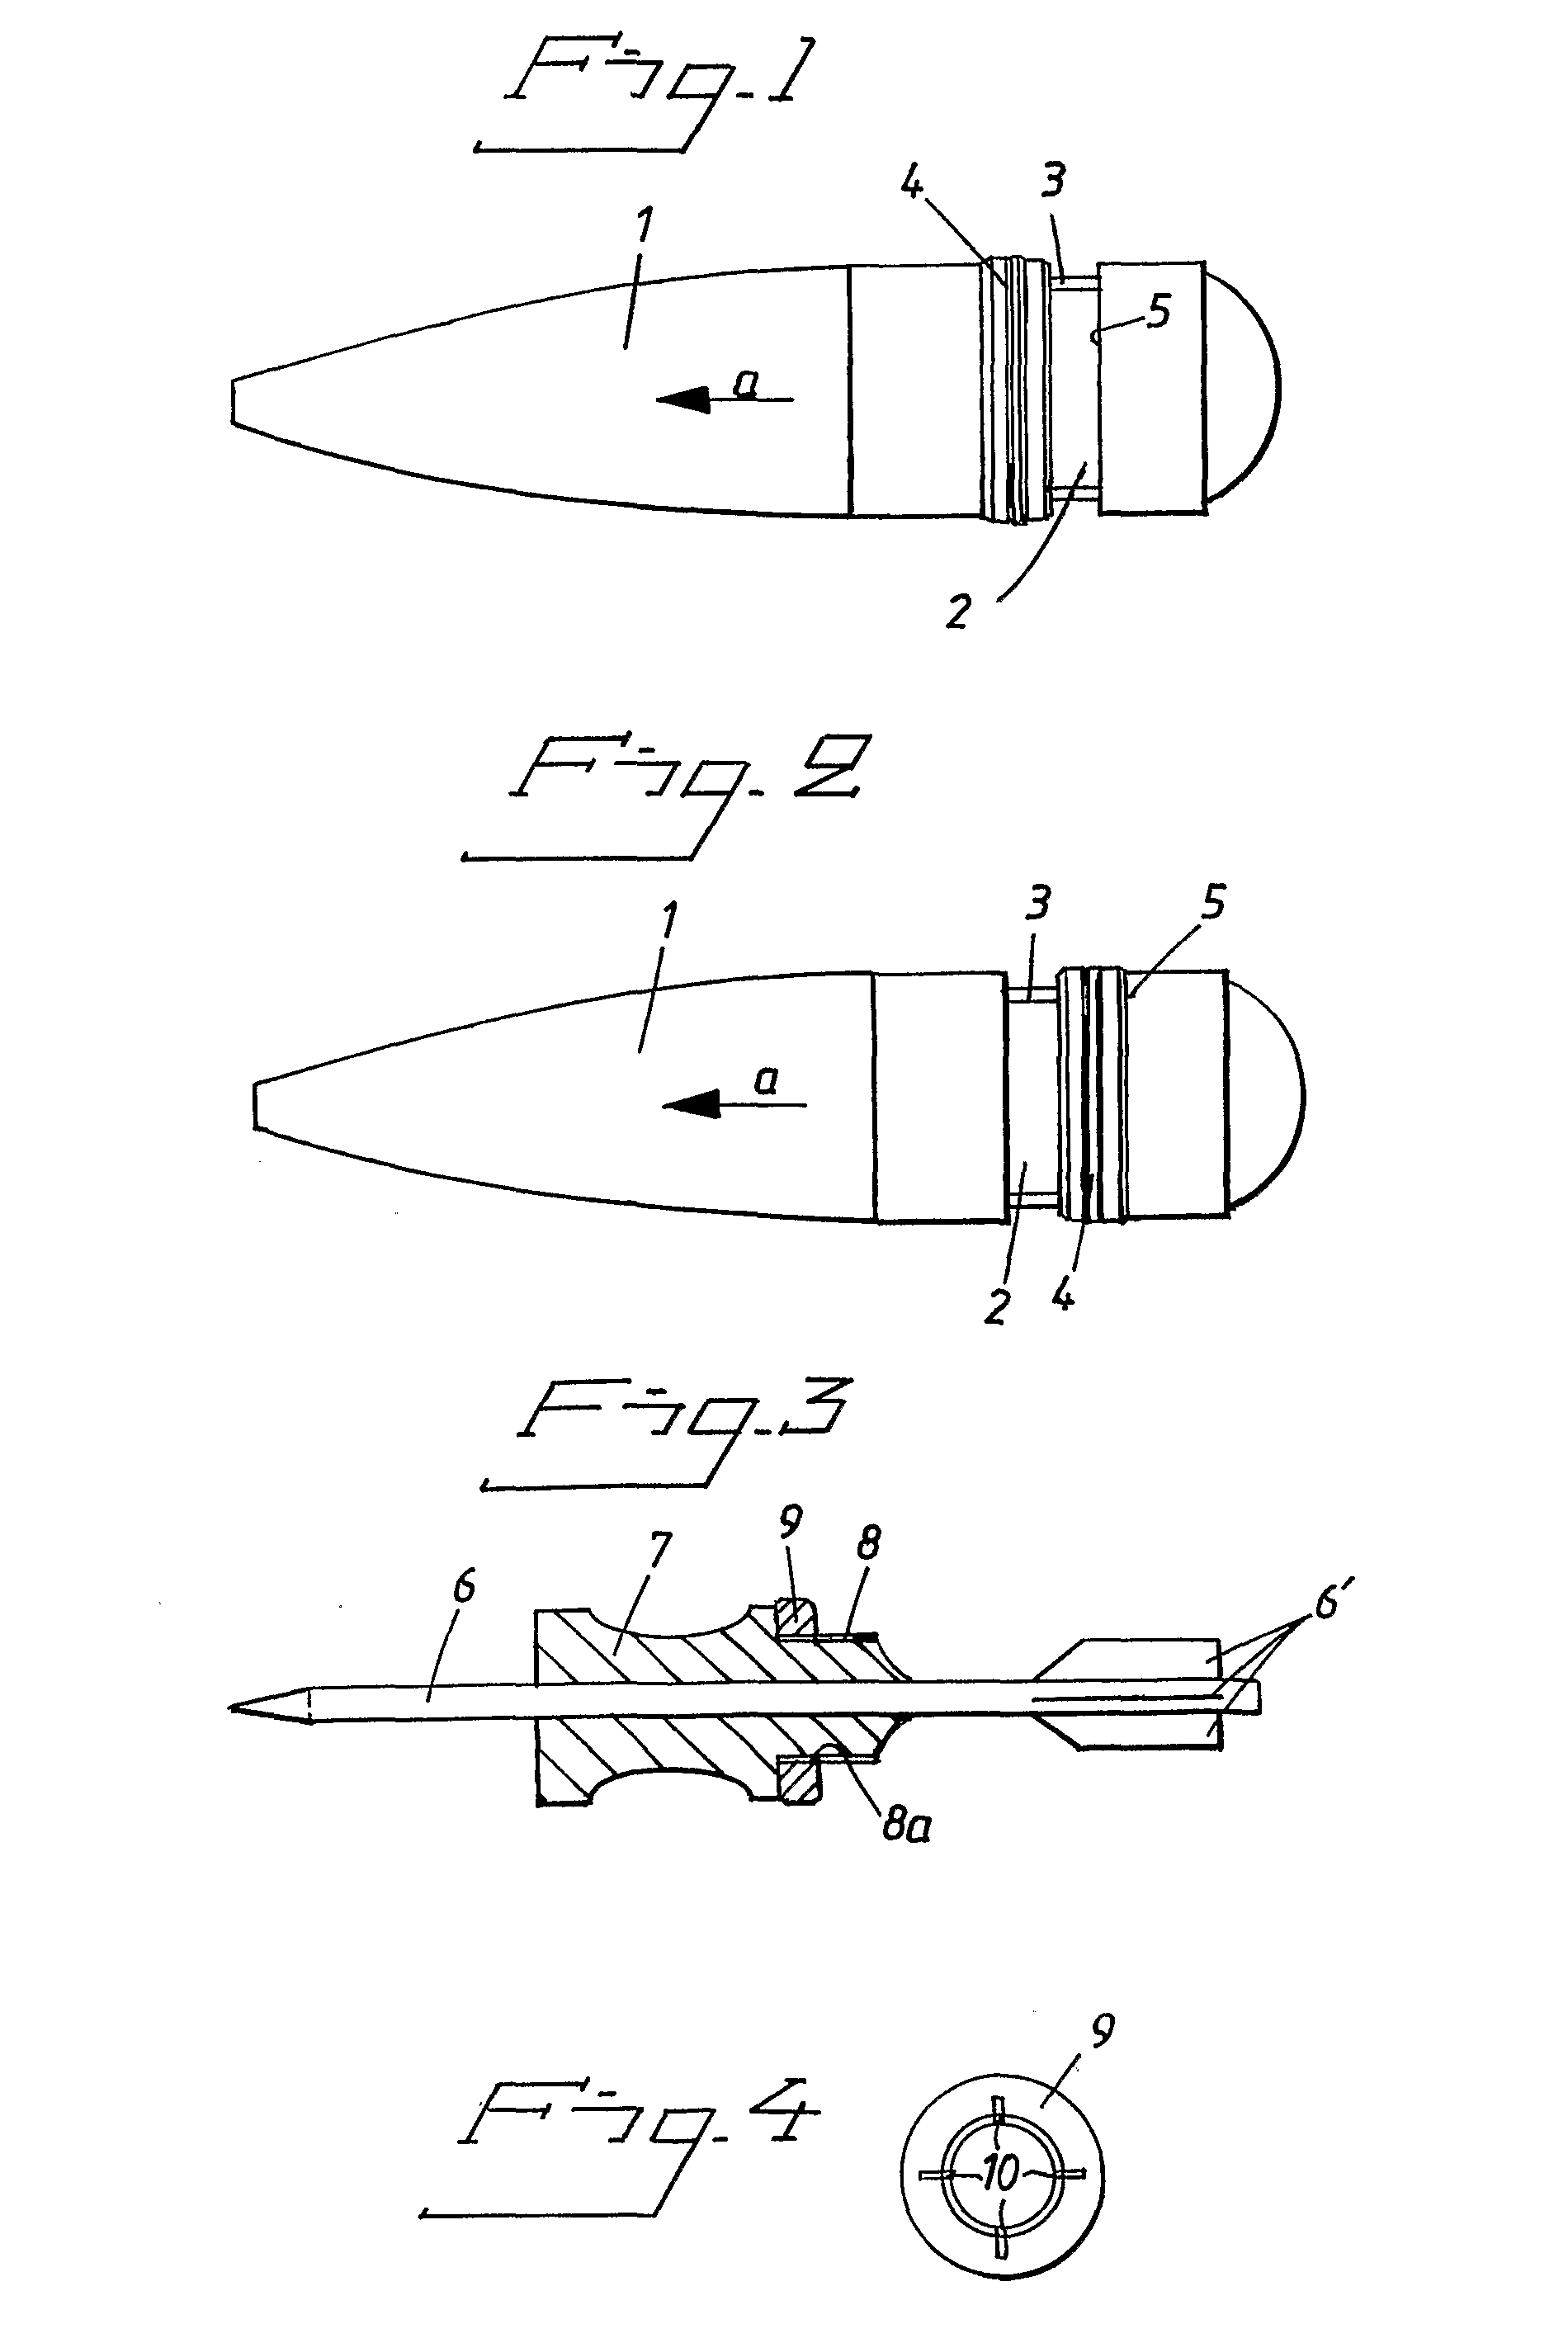 Method for manufacturing banded projectiles intended for firing from rifled barrels and projectiles made according to the method, and method for utilizing their special characteristics imparted by the method for manufacture when firing these projectiles